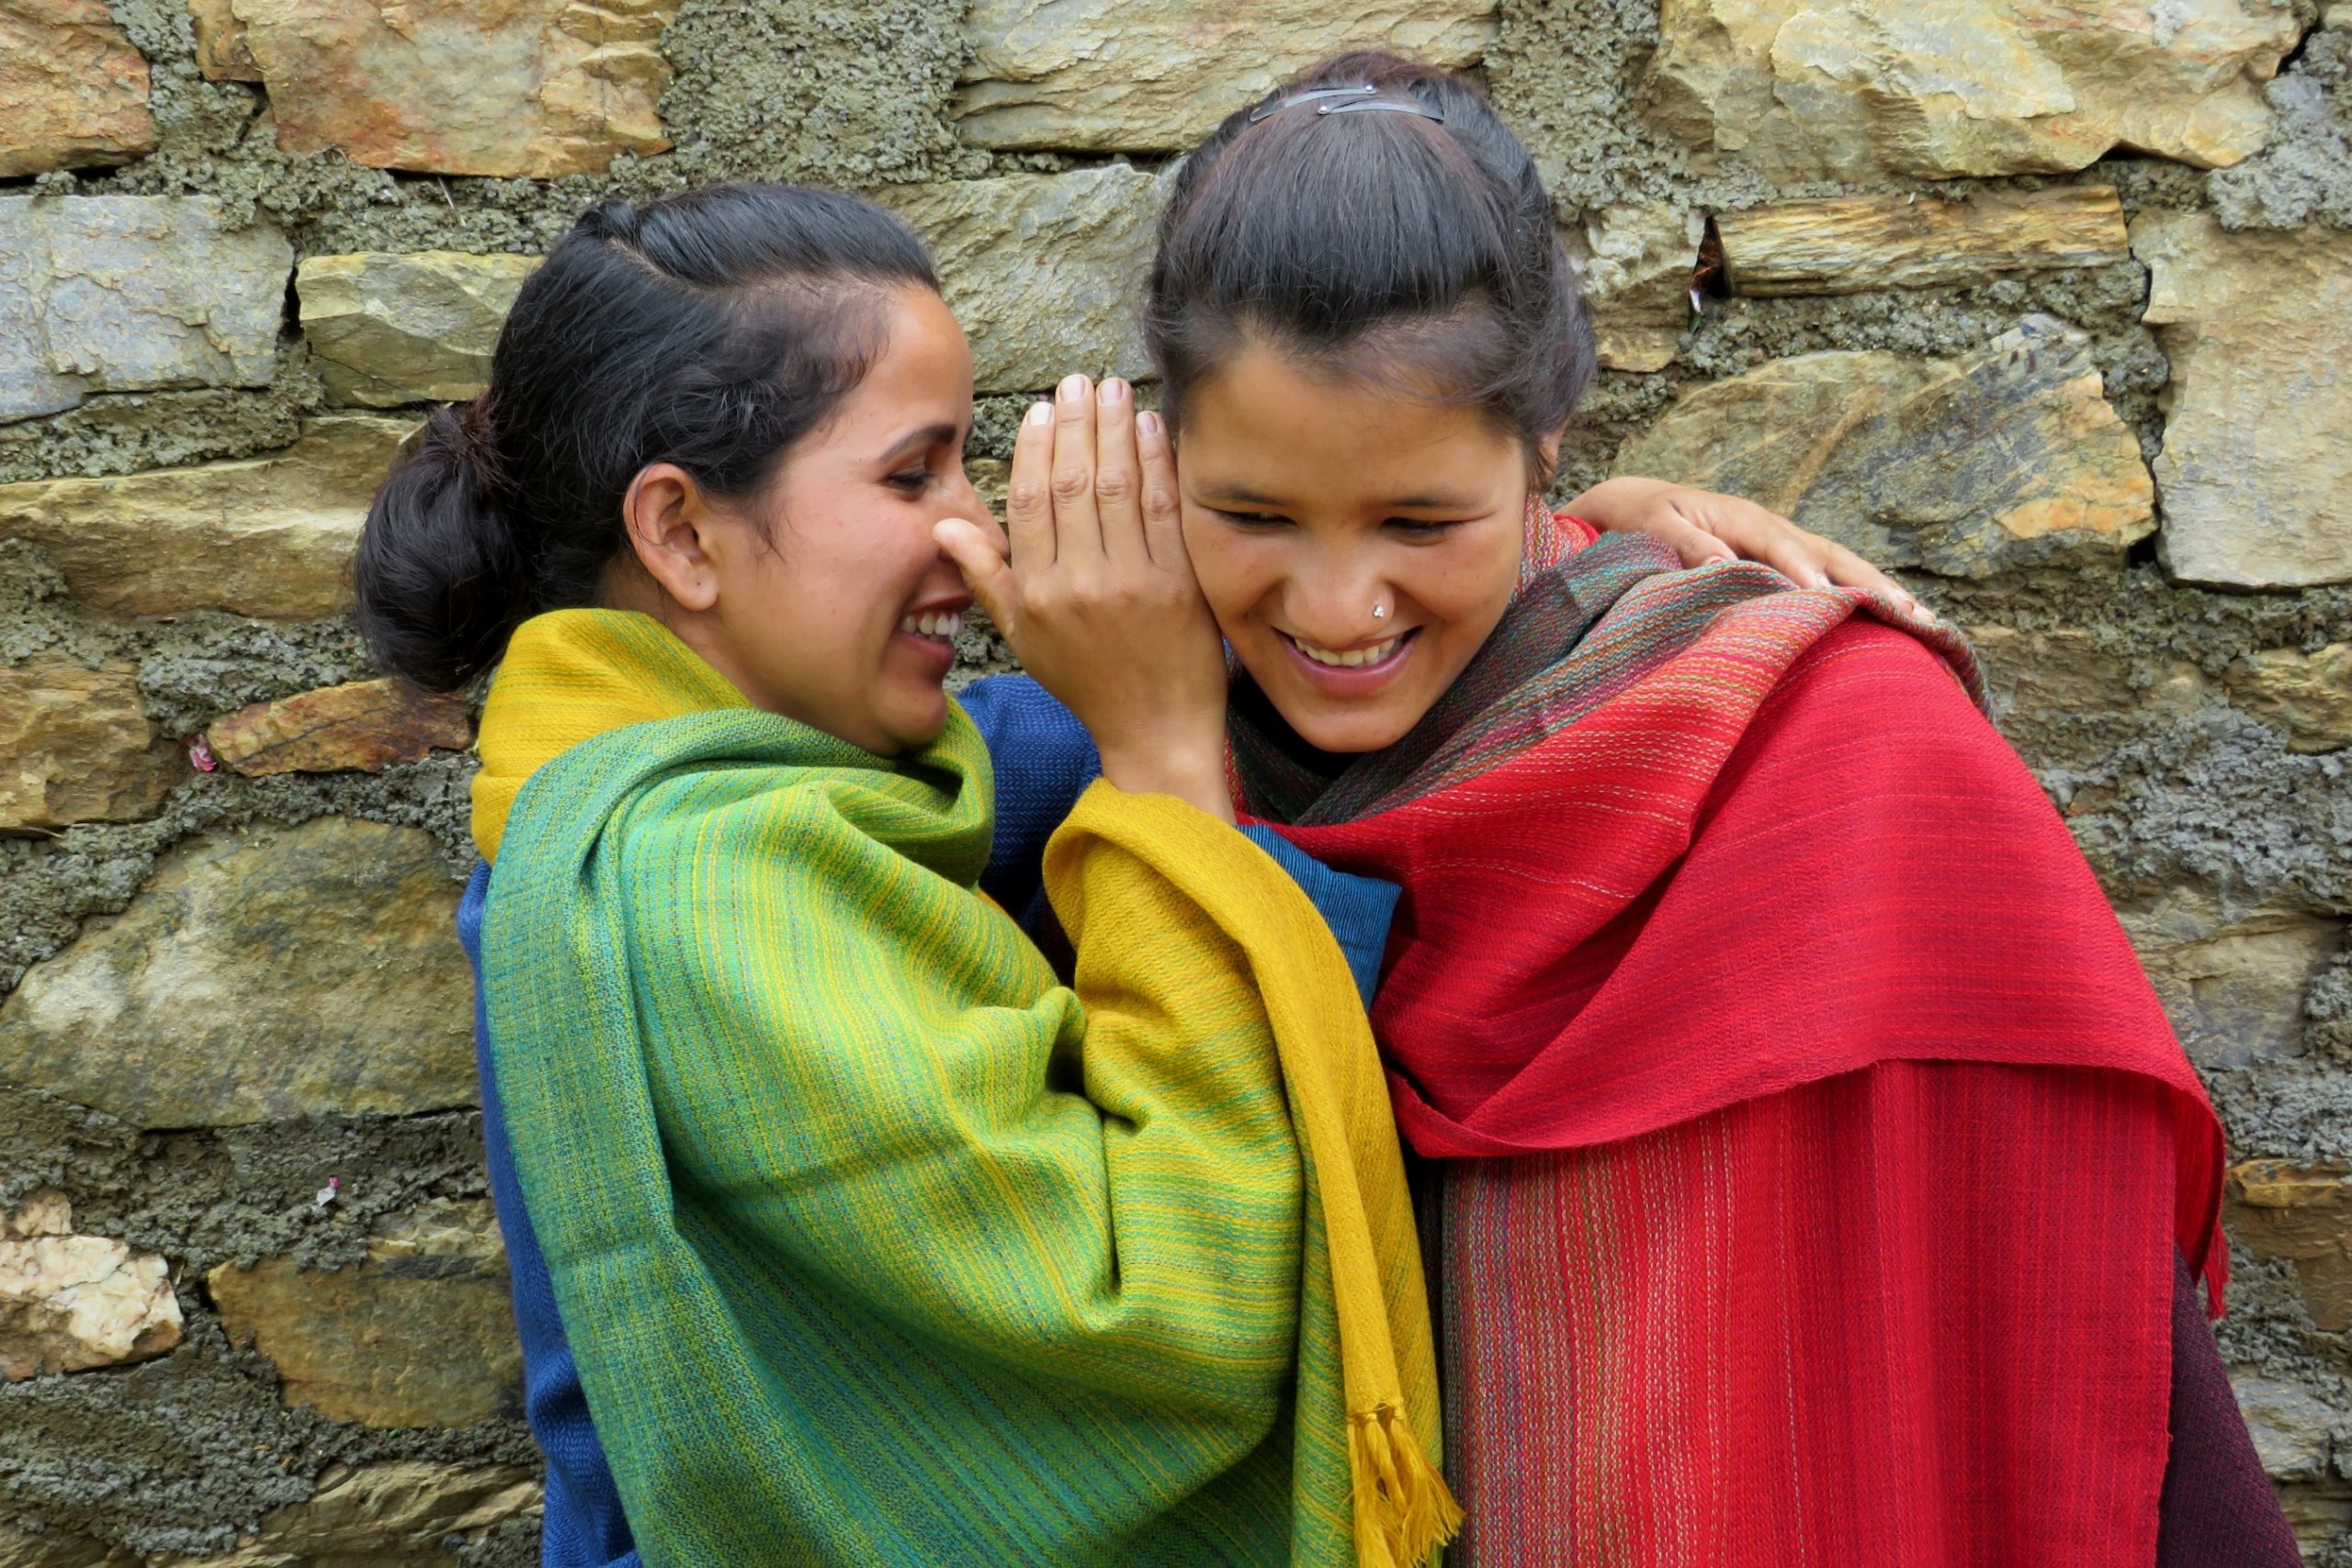 Two women wearing colourful shawls. Woman on the left whispering something into the ear of the woman on the right. They are both smiling.